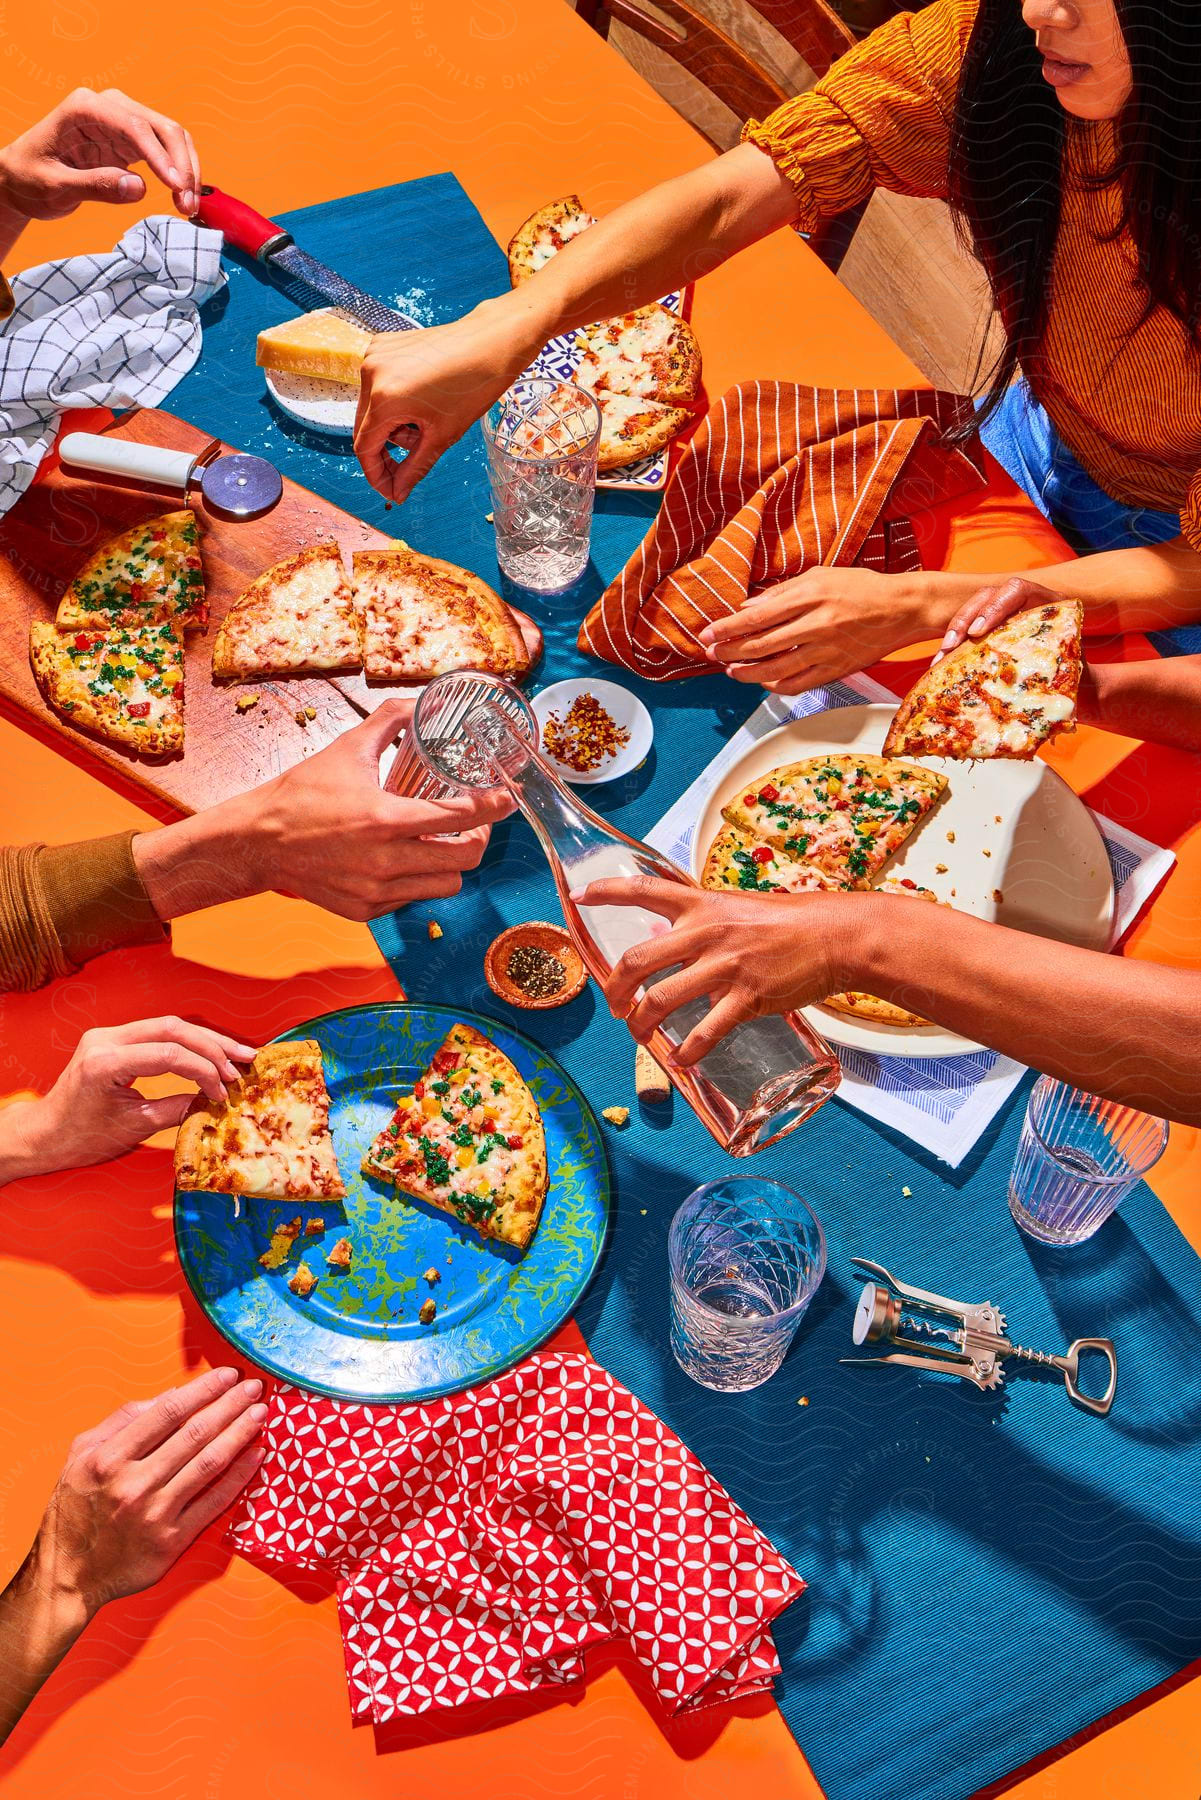 Stock photo of a group enjoying a pizza meal together